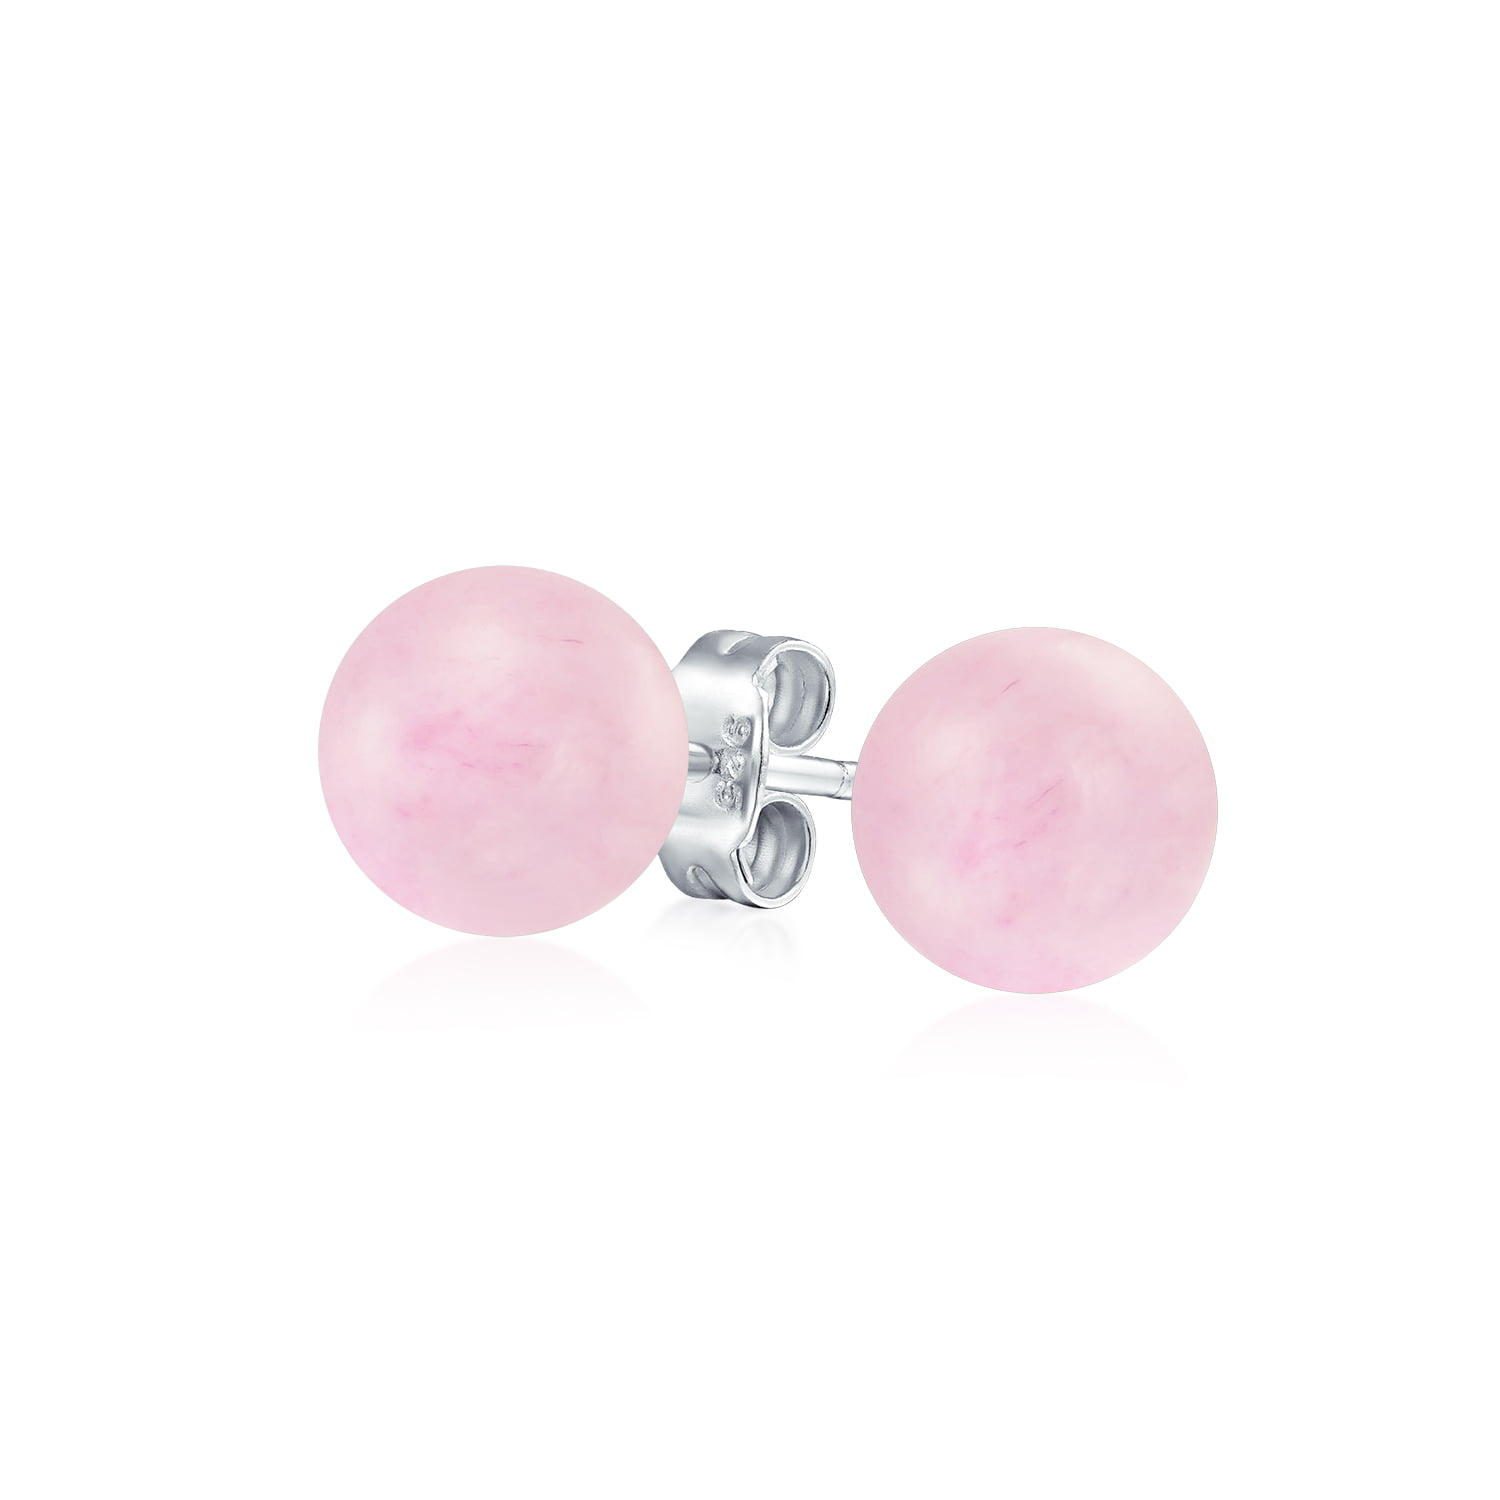 Simple Gemstone Round Bead Ball Stud Clip On Earrings For Women Non Piercing 925 Sterling Silver Birthstone Colors 8MM